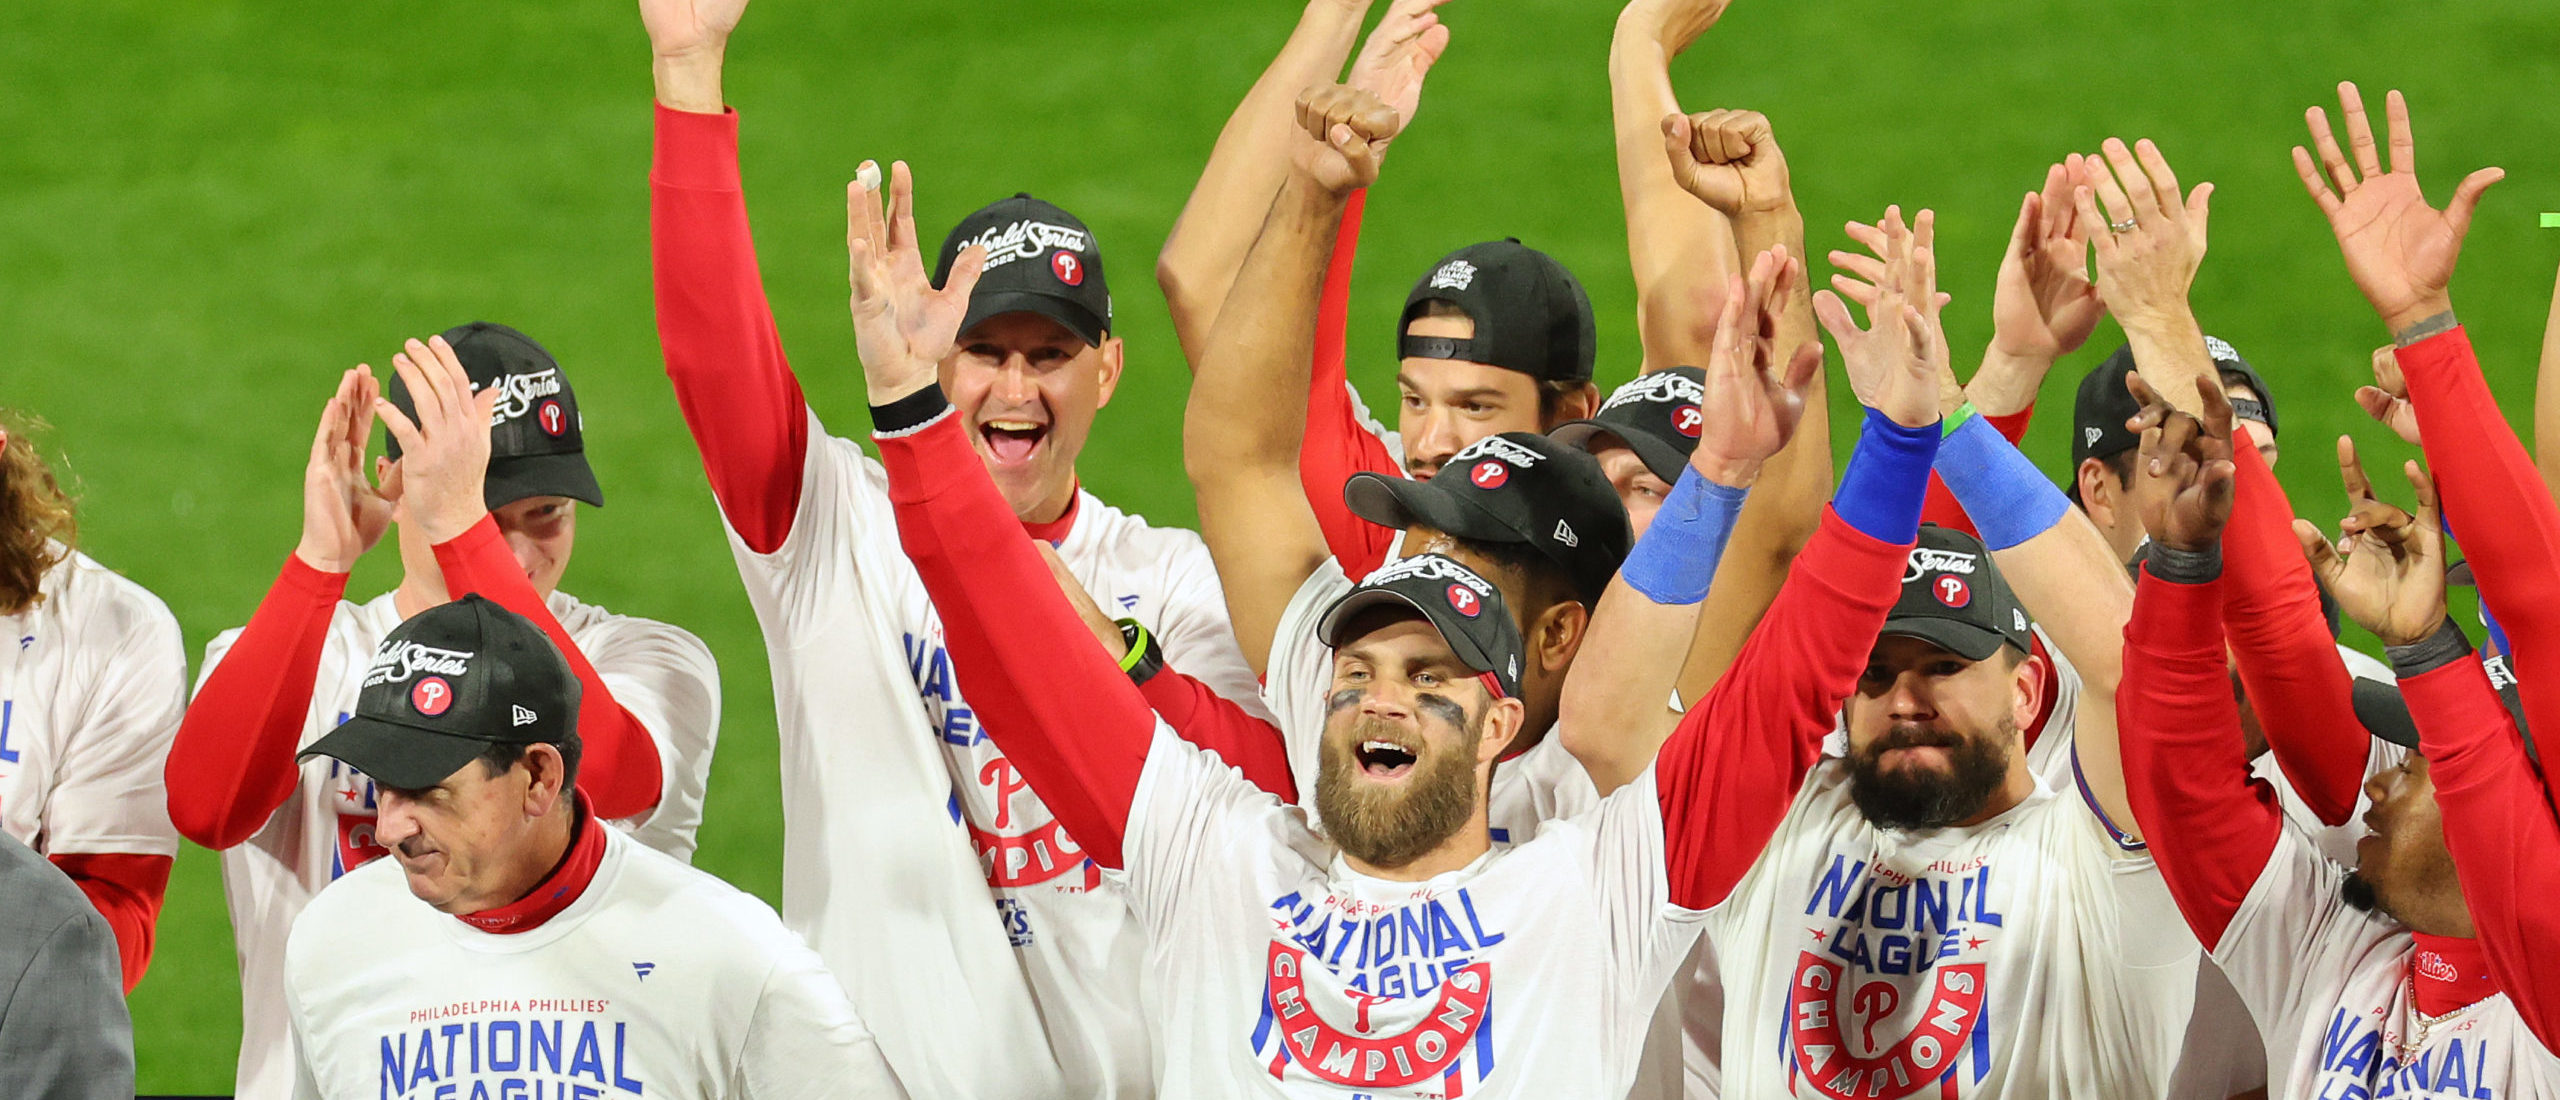 The Philadelphia Phillies have advanced to the 2022 World Series